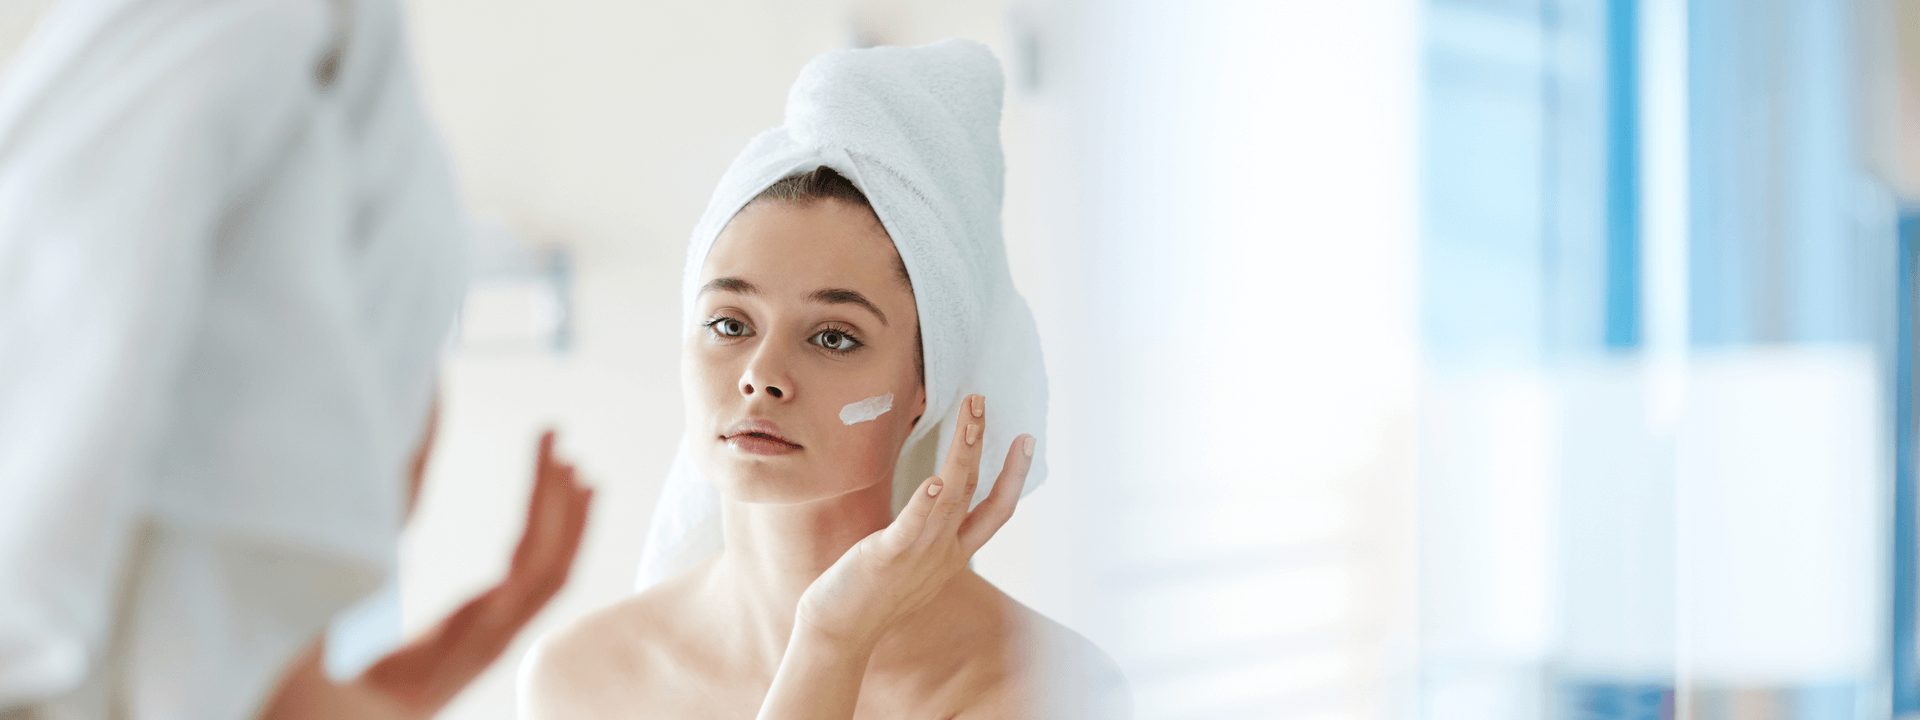 It's Never Too Late to Start a Great Skincare Routine - 4 Steps to Beautiful Skin